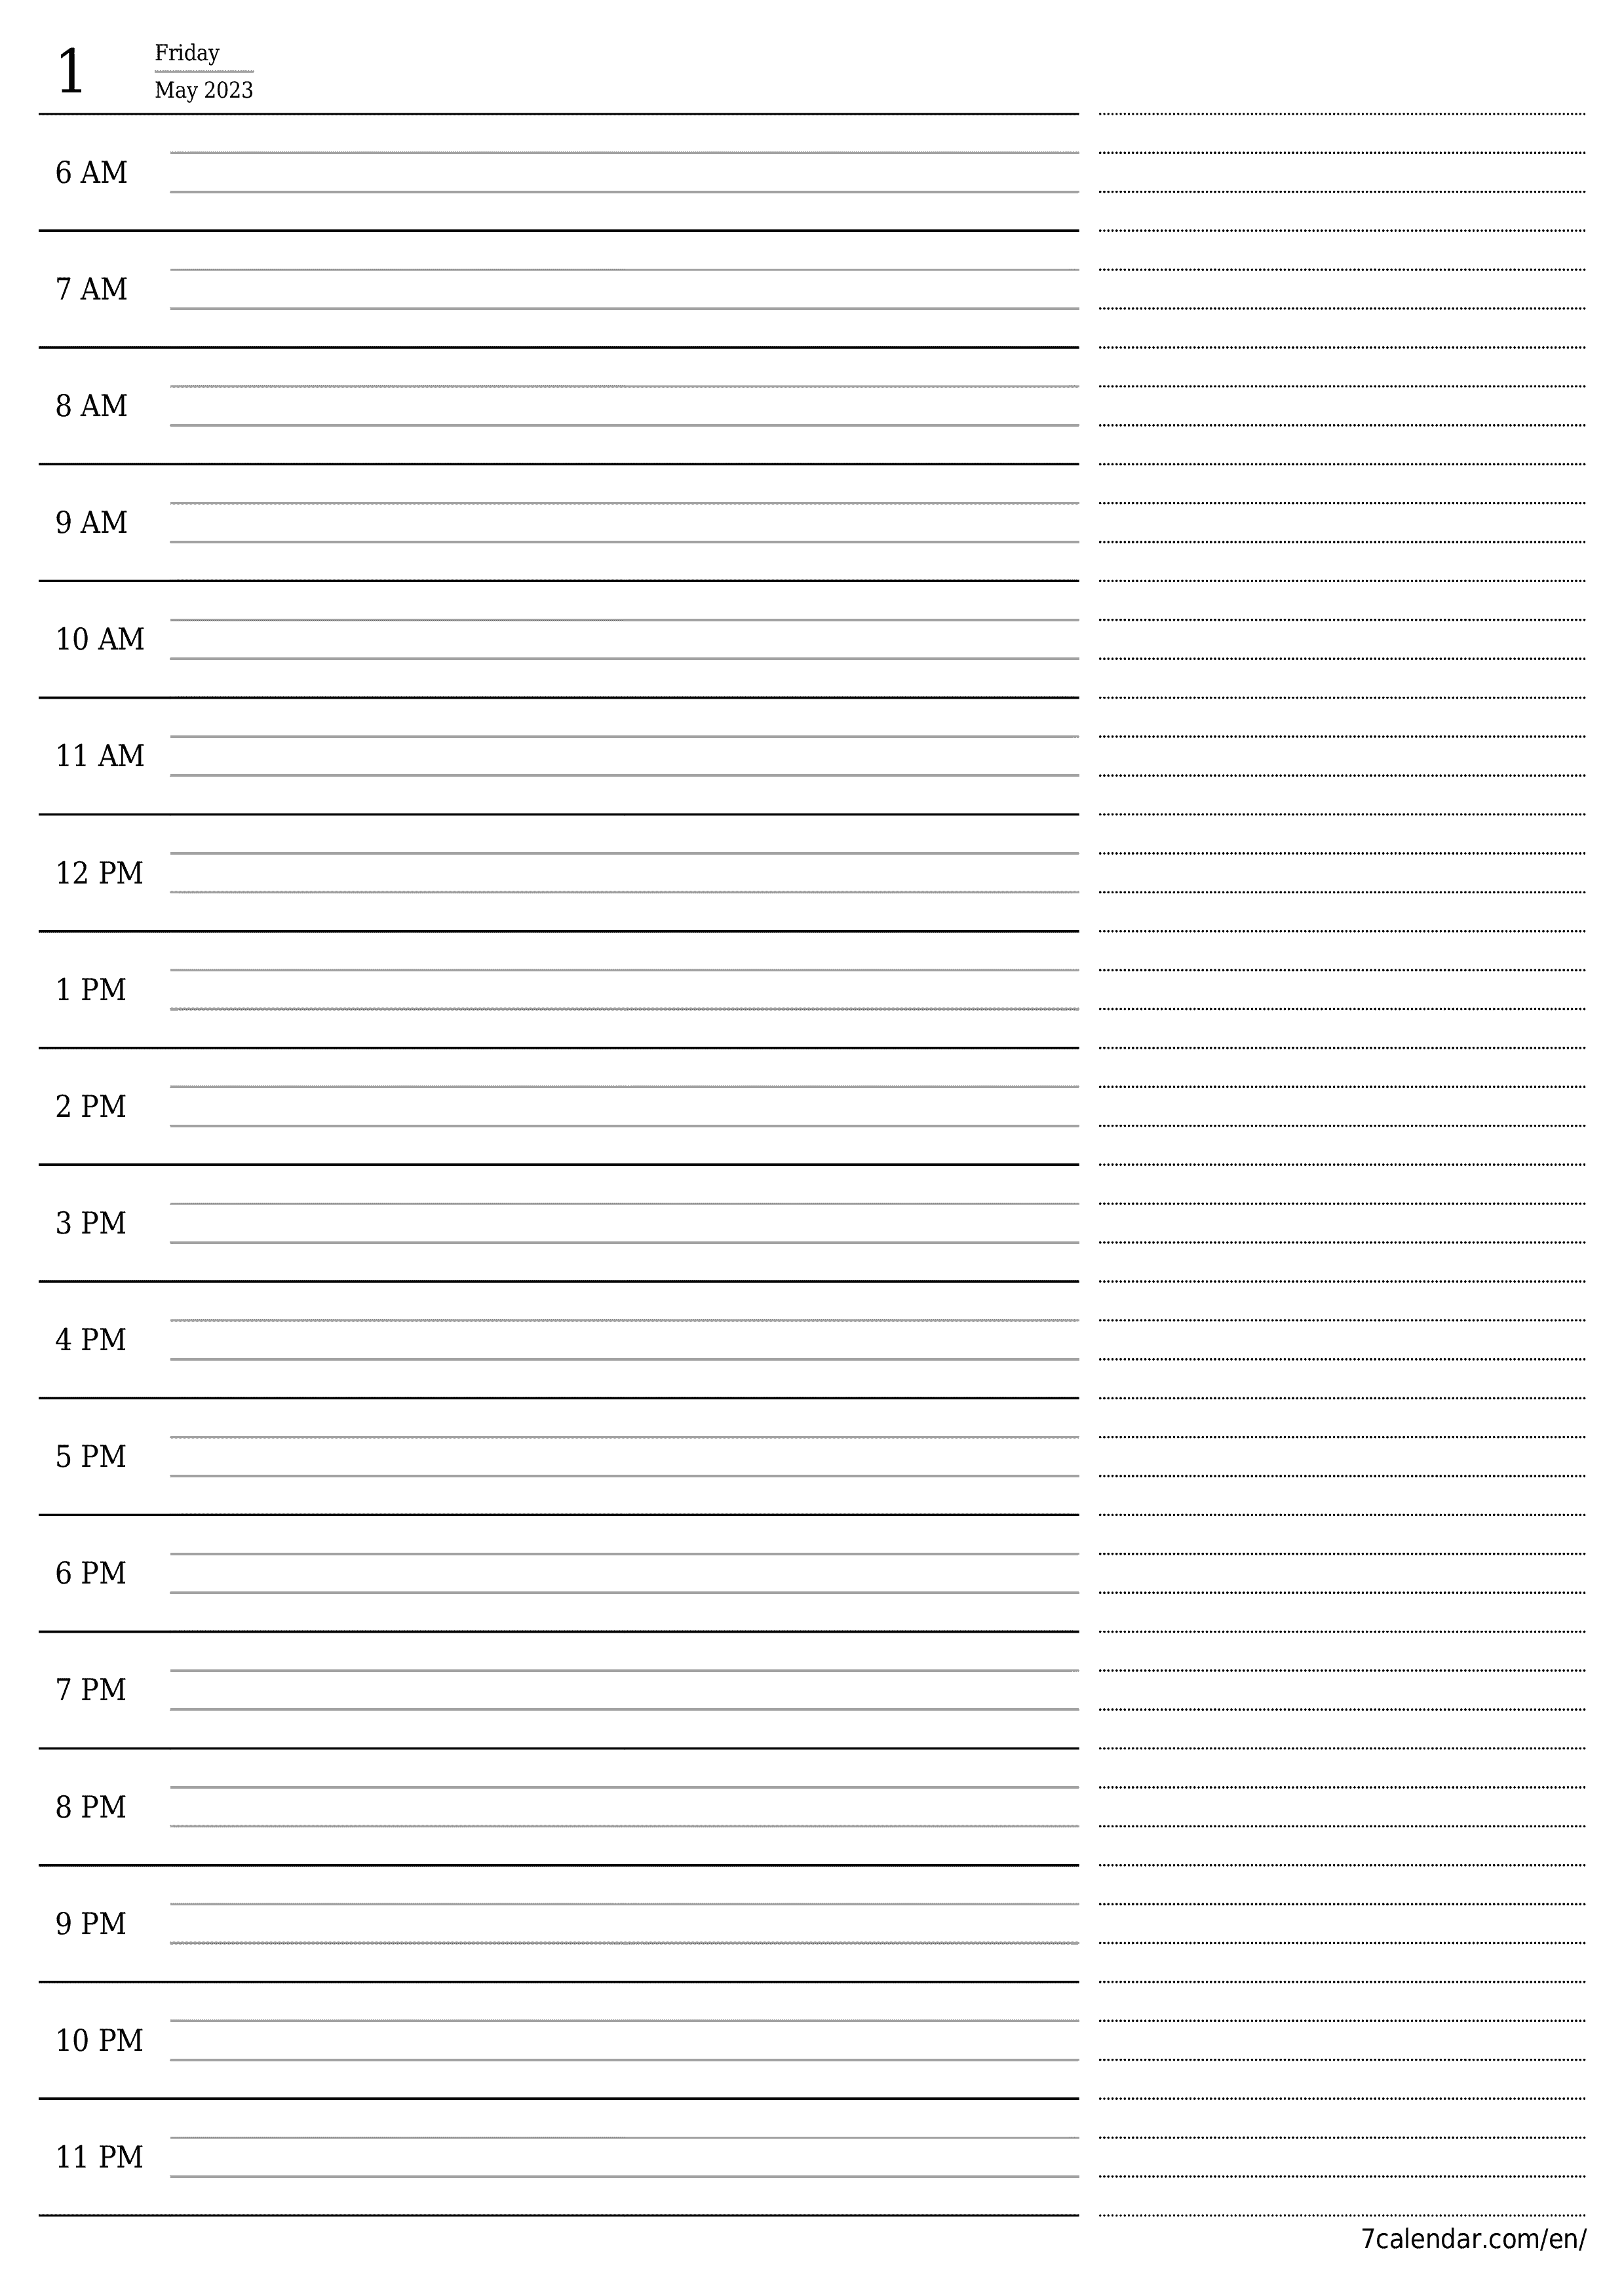 Blank daily calendar planner for day May 2023 with notes, save and print to PDF PNG English - 7calendar.com